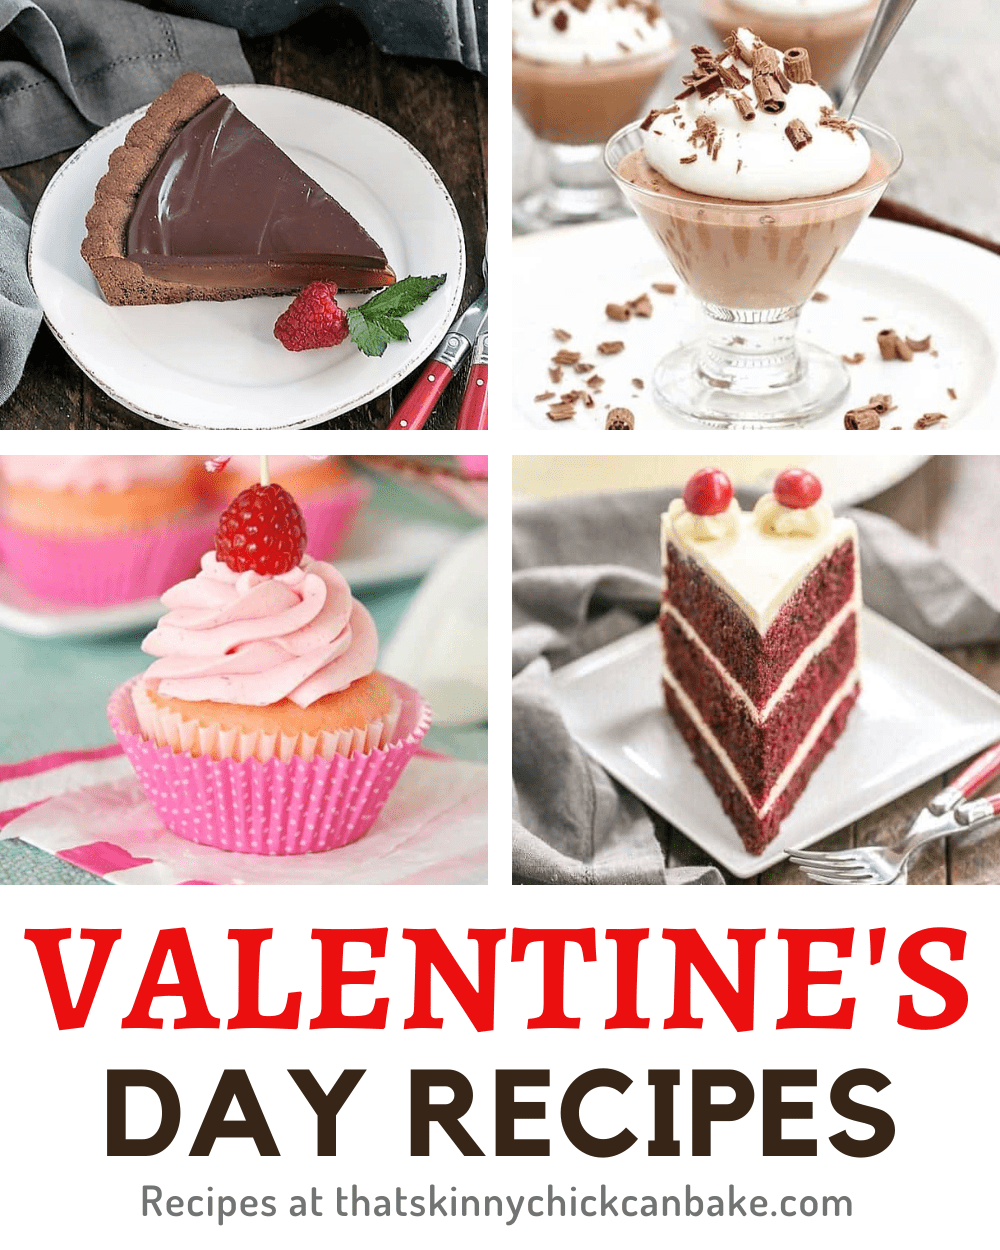 Featured image collage with 4 photos over a title text box for a Valentine's Day recipe roundup.